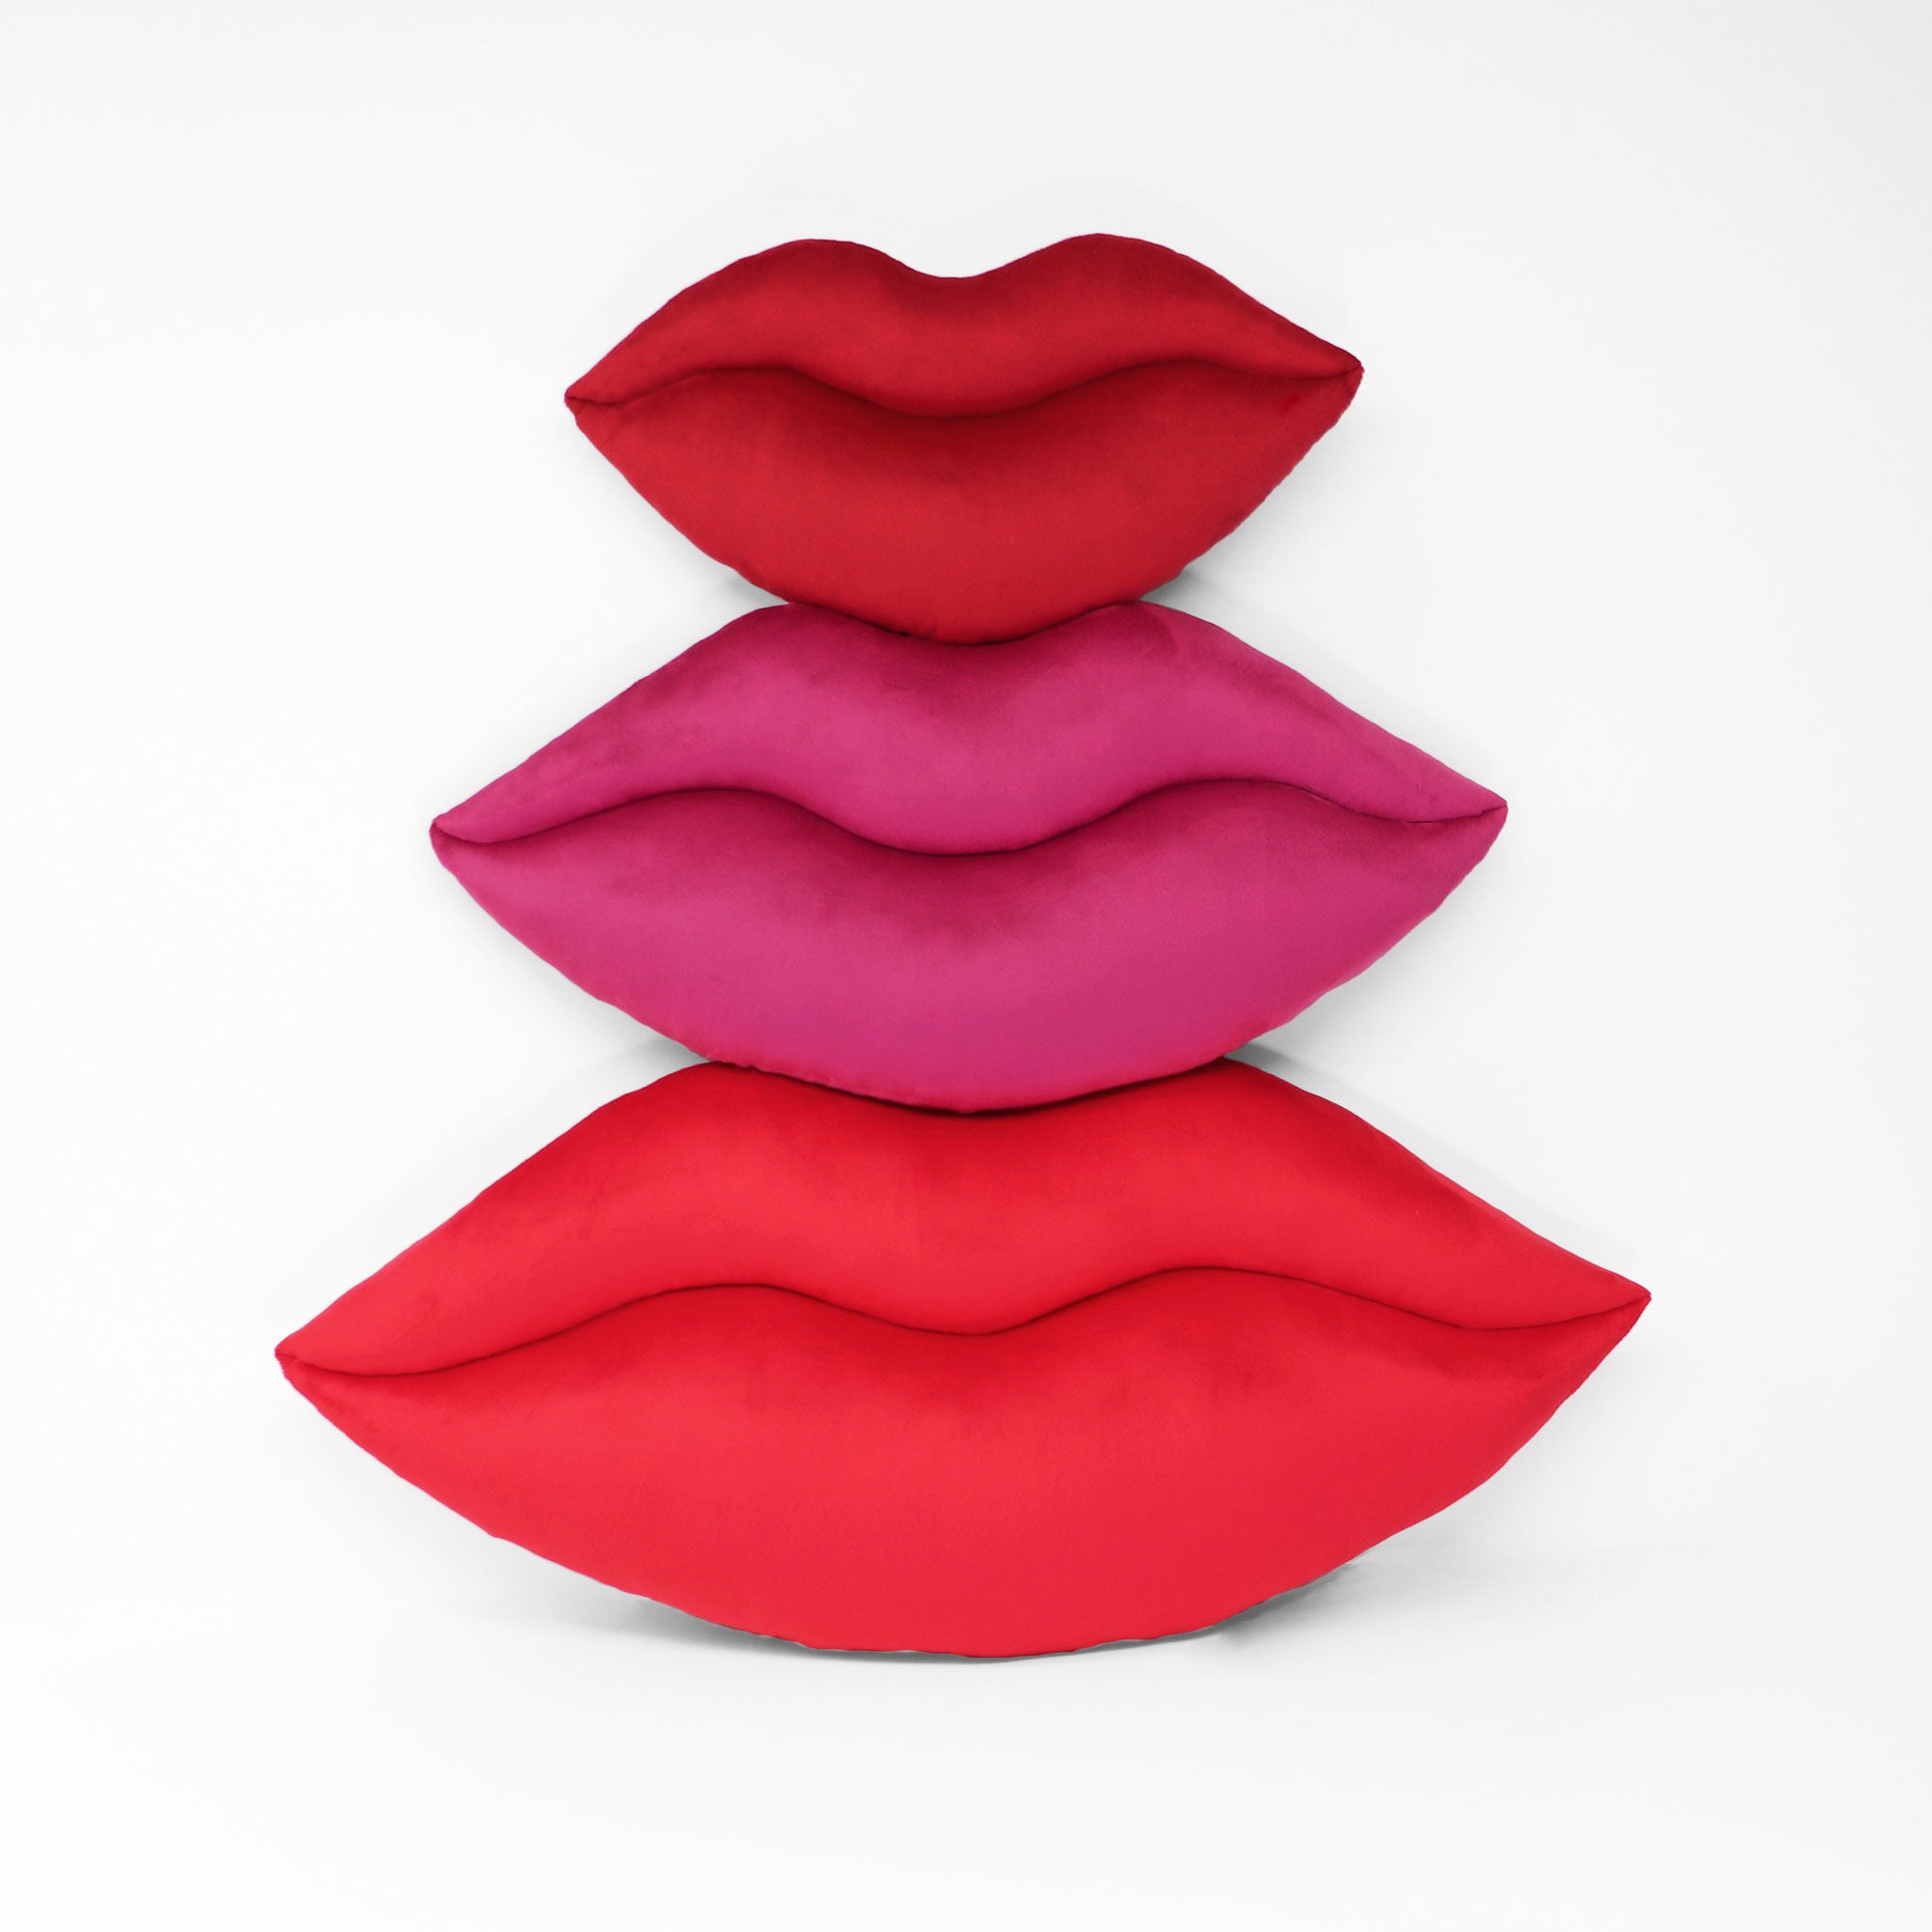 Lips shaped decorative toss pillows shown in three sizes.